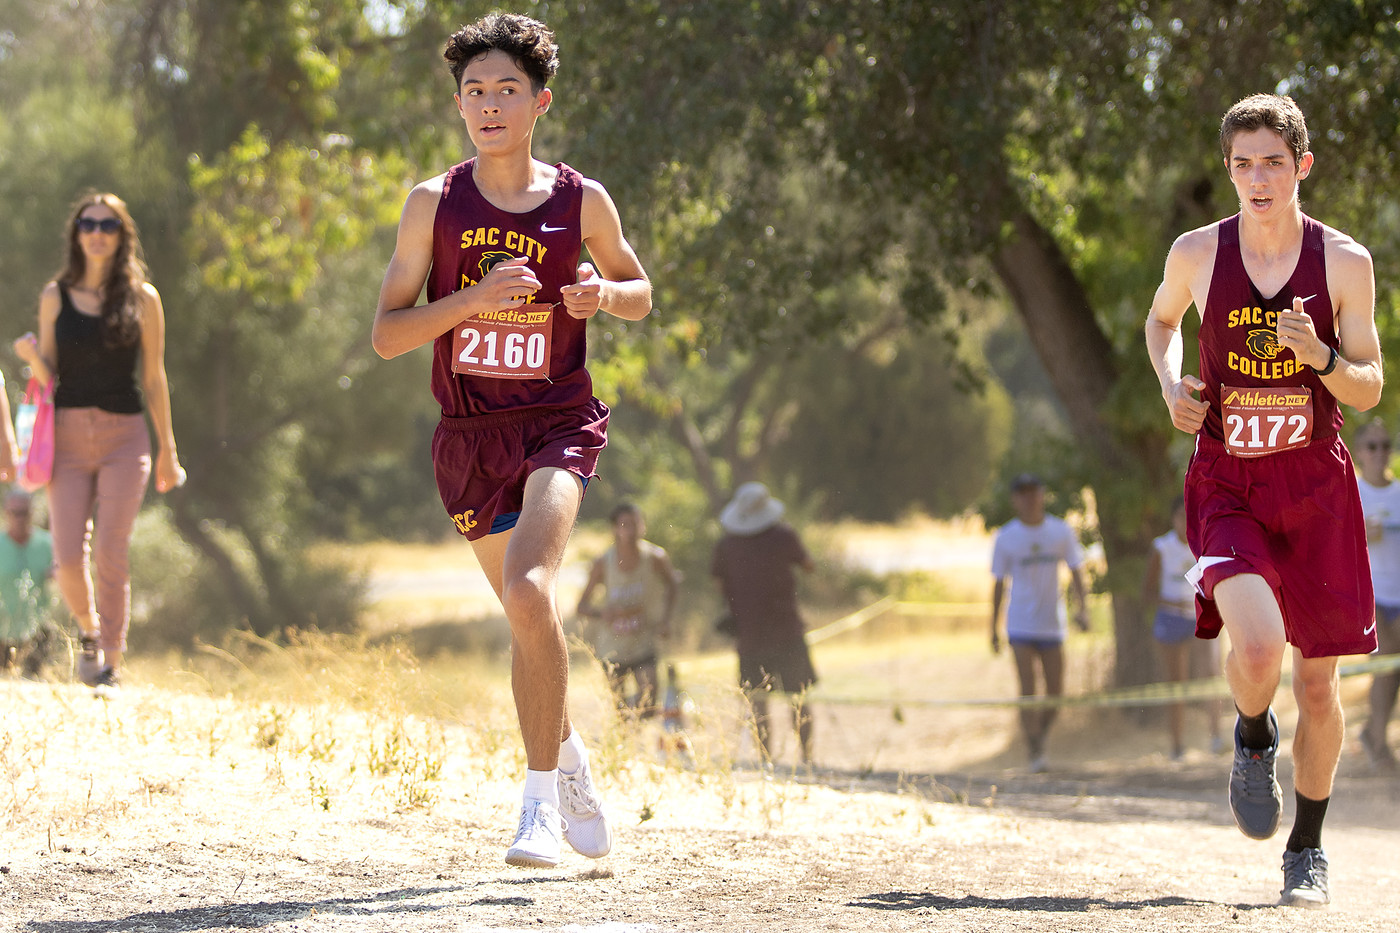 Men's XC finishes 14th at the NorCal Regional; Hicks (54th) and York (59th) were the top 2 runners for City